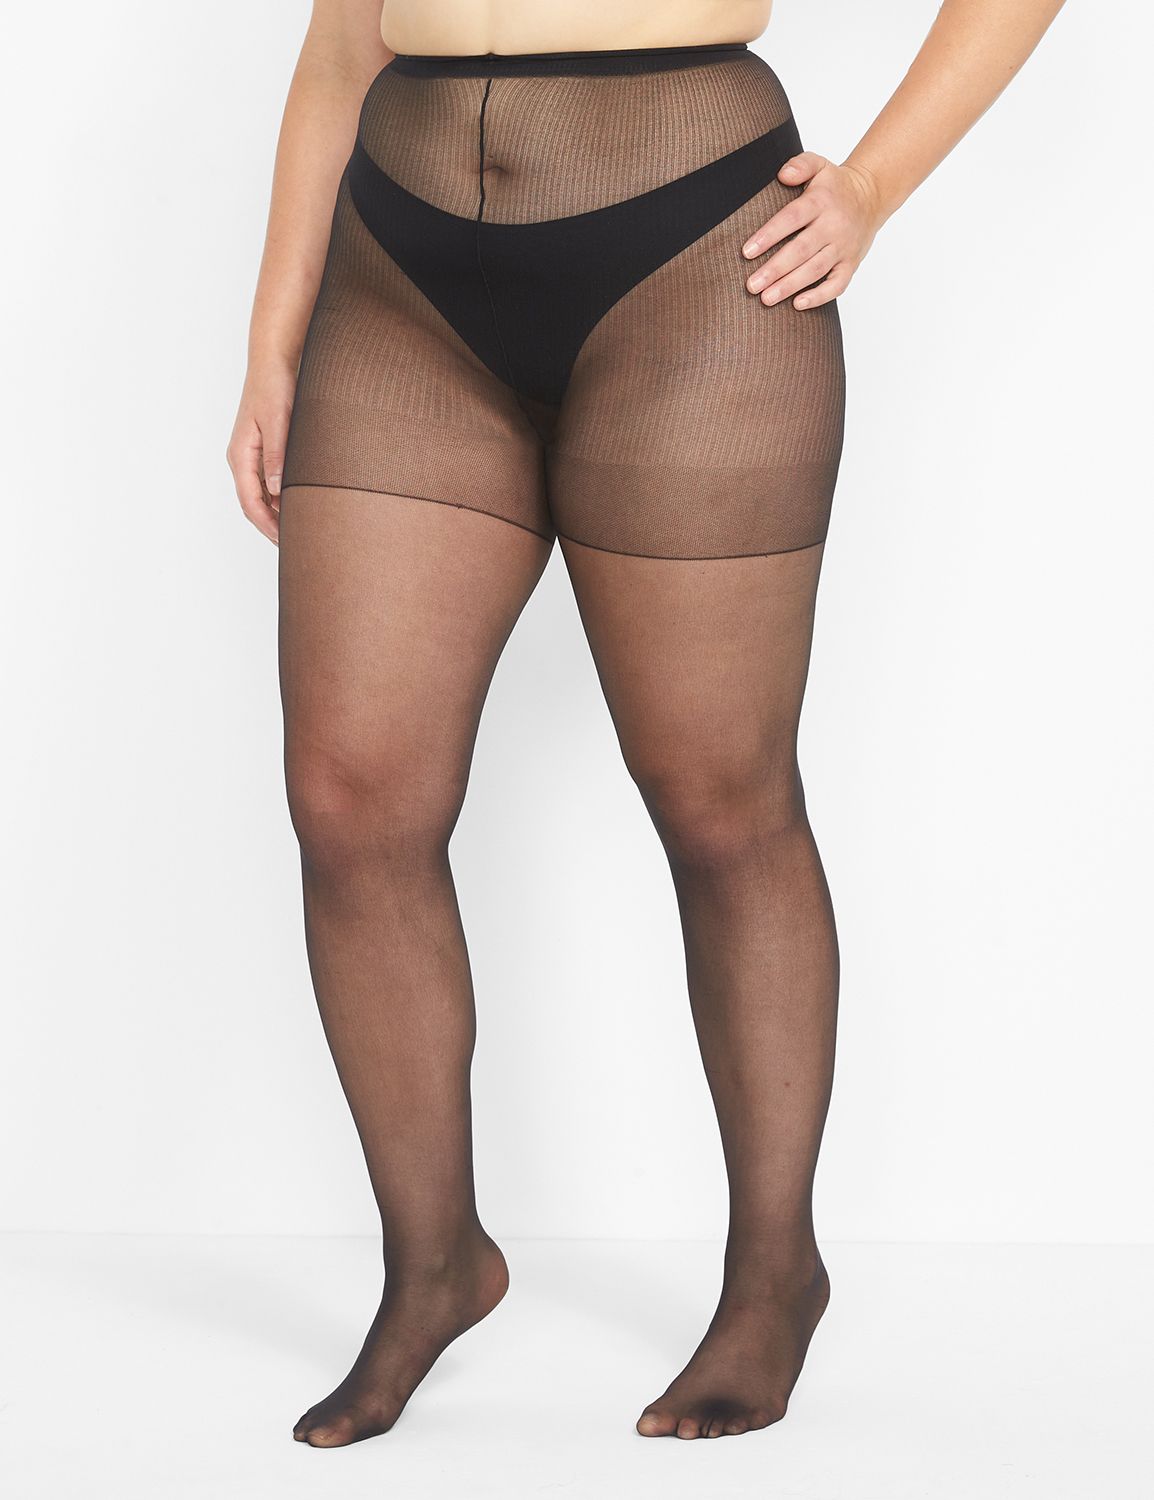  Sheer Non-Run Comfortable Support Pantyhose Hosiery, 3 Pack, Tan,  One Size - Made in the USA: Clothing, Shoes & Jewelry